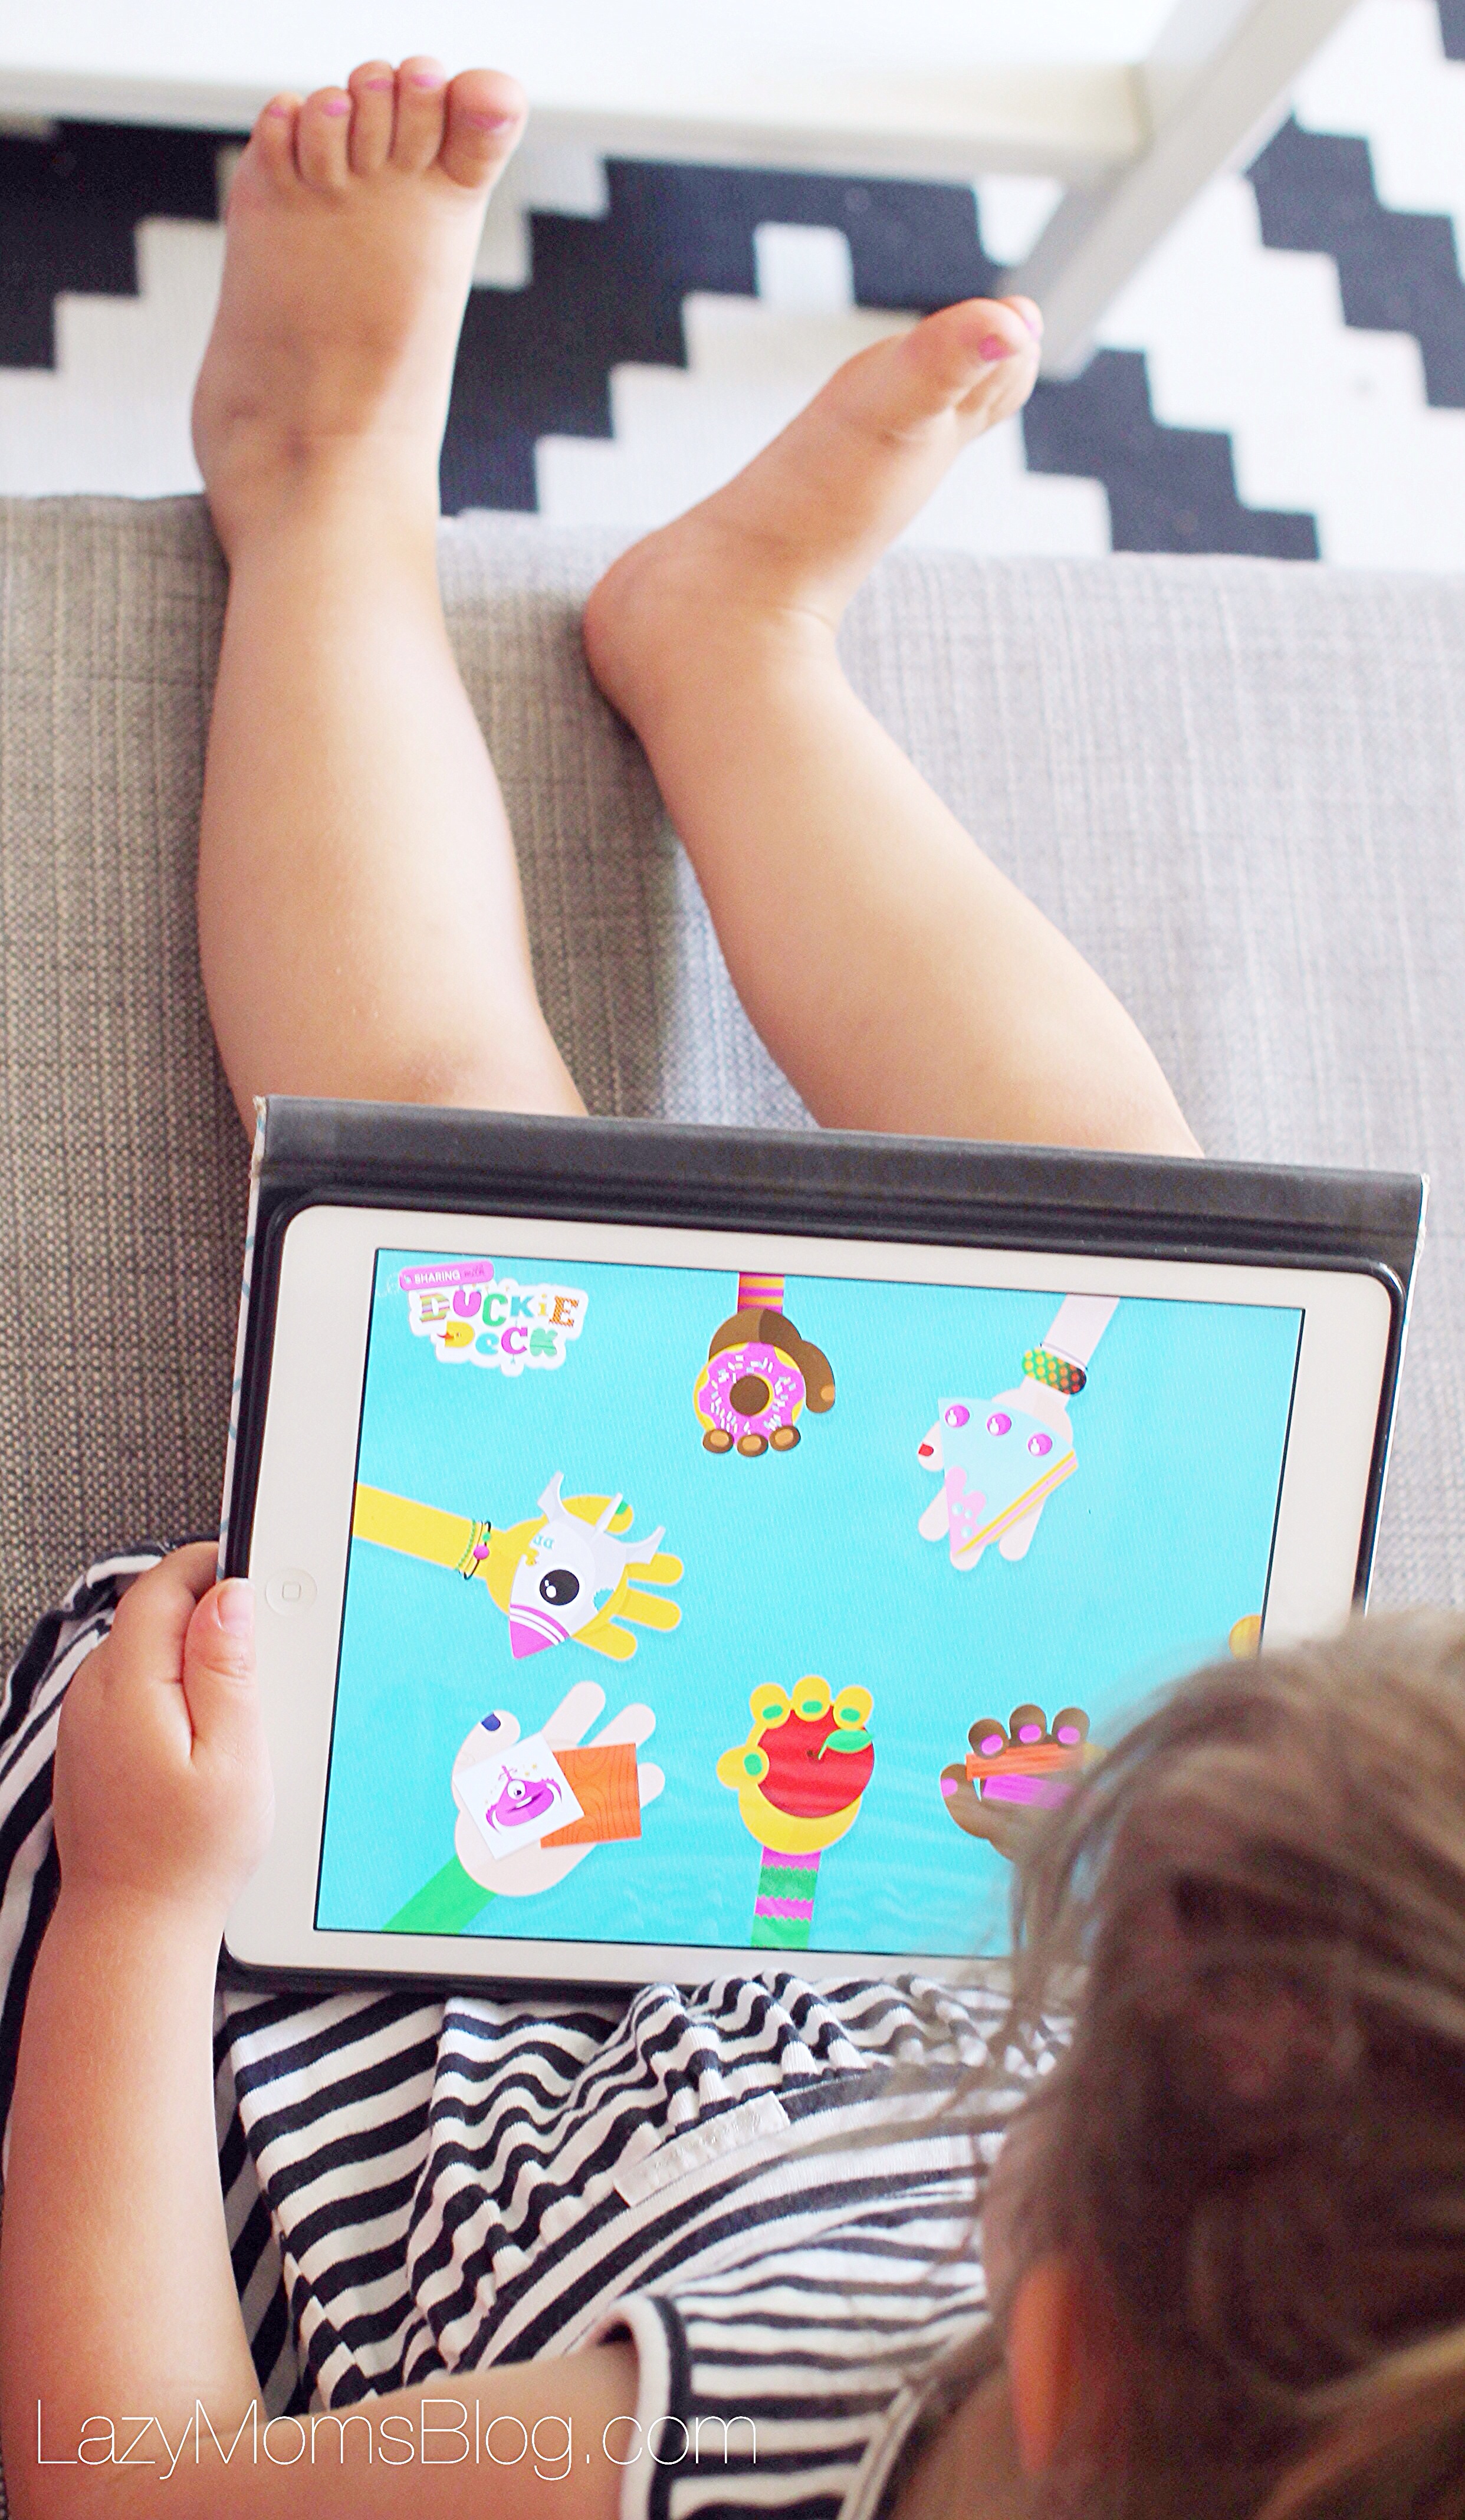 Educative screen time for kids